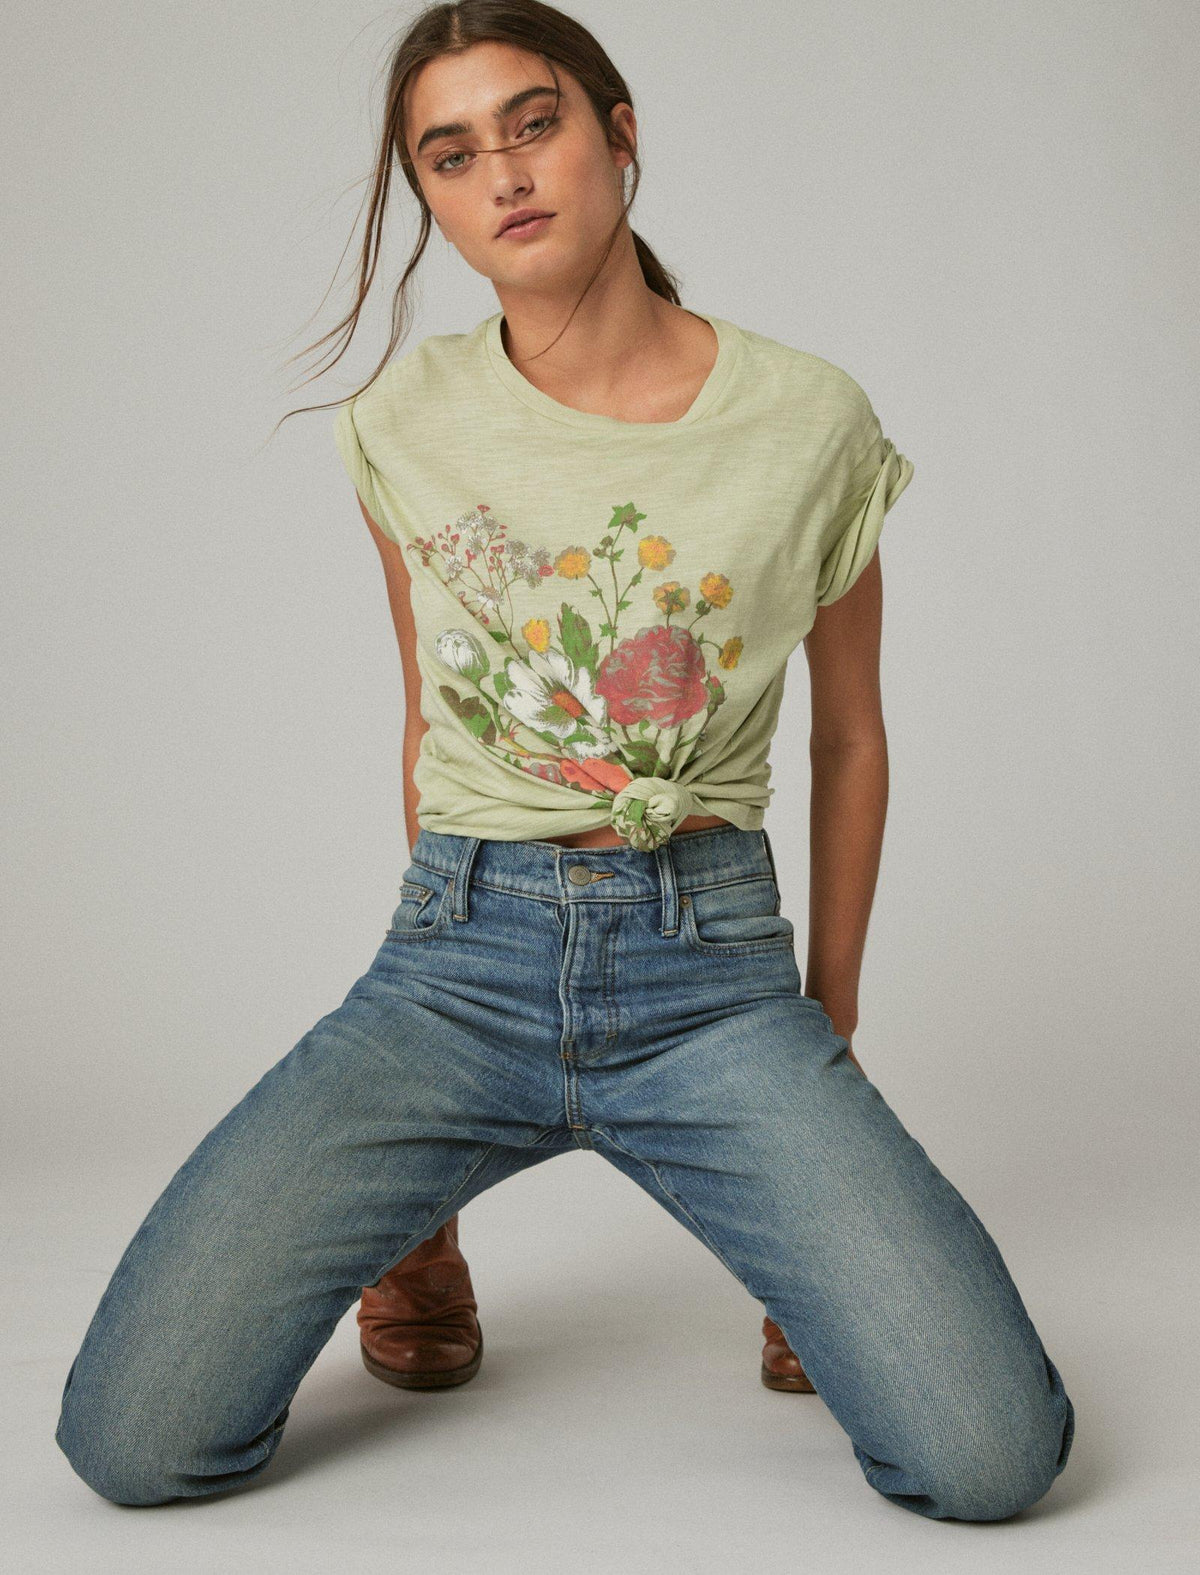 Lucky Brand Romantic Floral Boyfriend Tee - Women's Clothing Tops Shirts Tee Graphic T Shirts #3443 Laurel Green